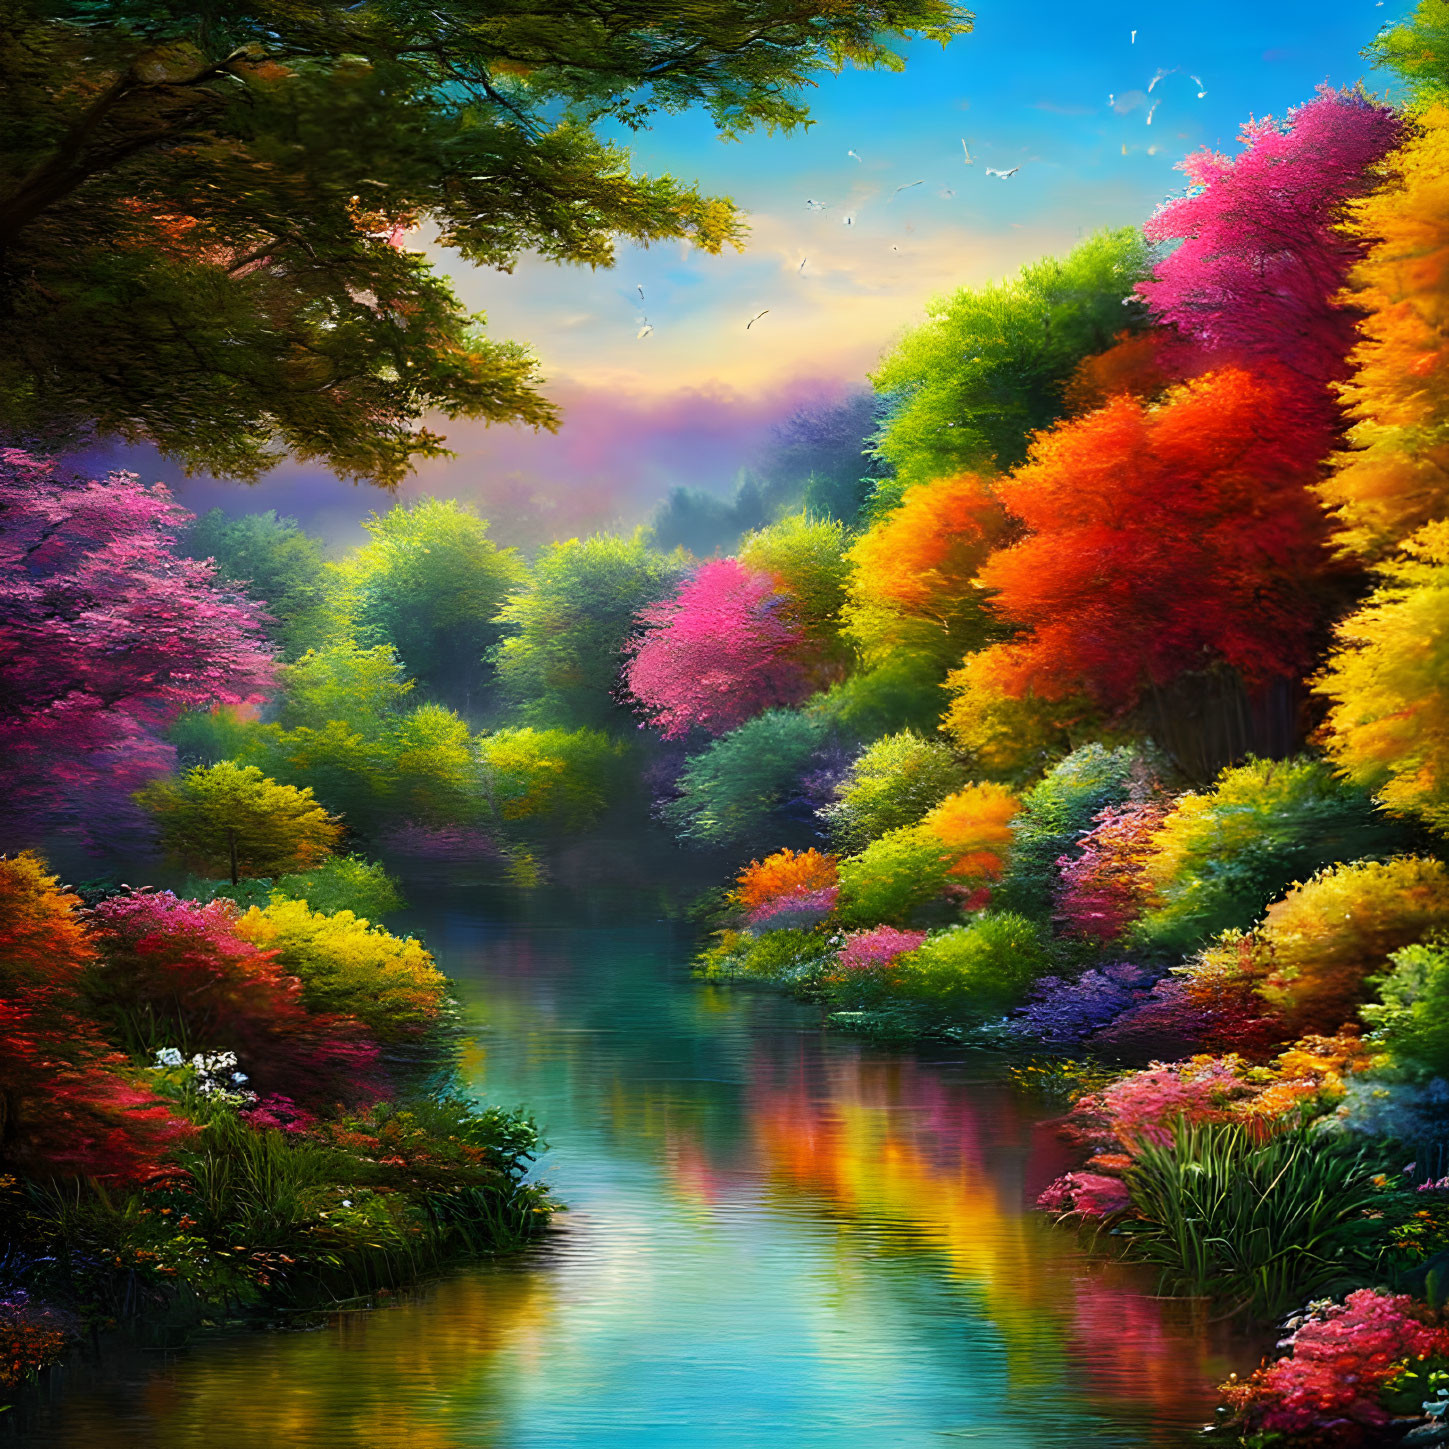 Colorful Forest and Serene River Reflecting Twilight Sky